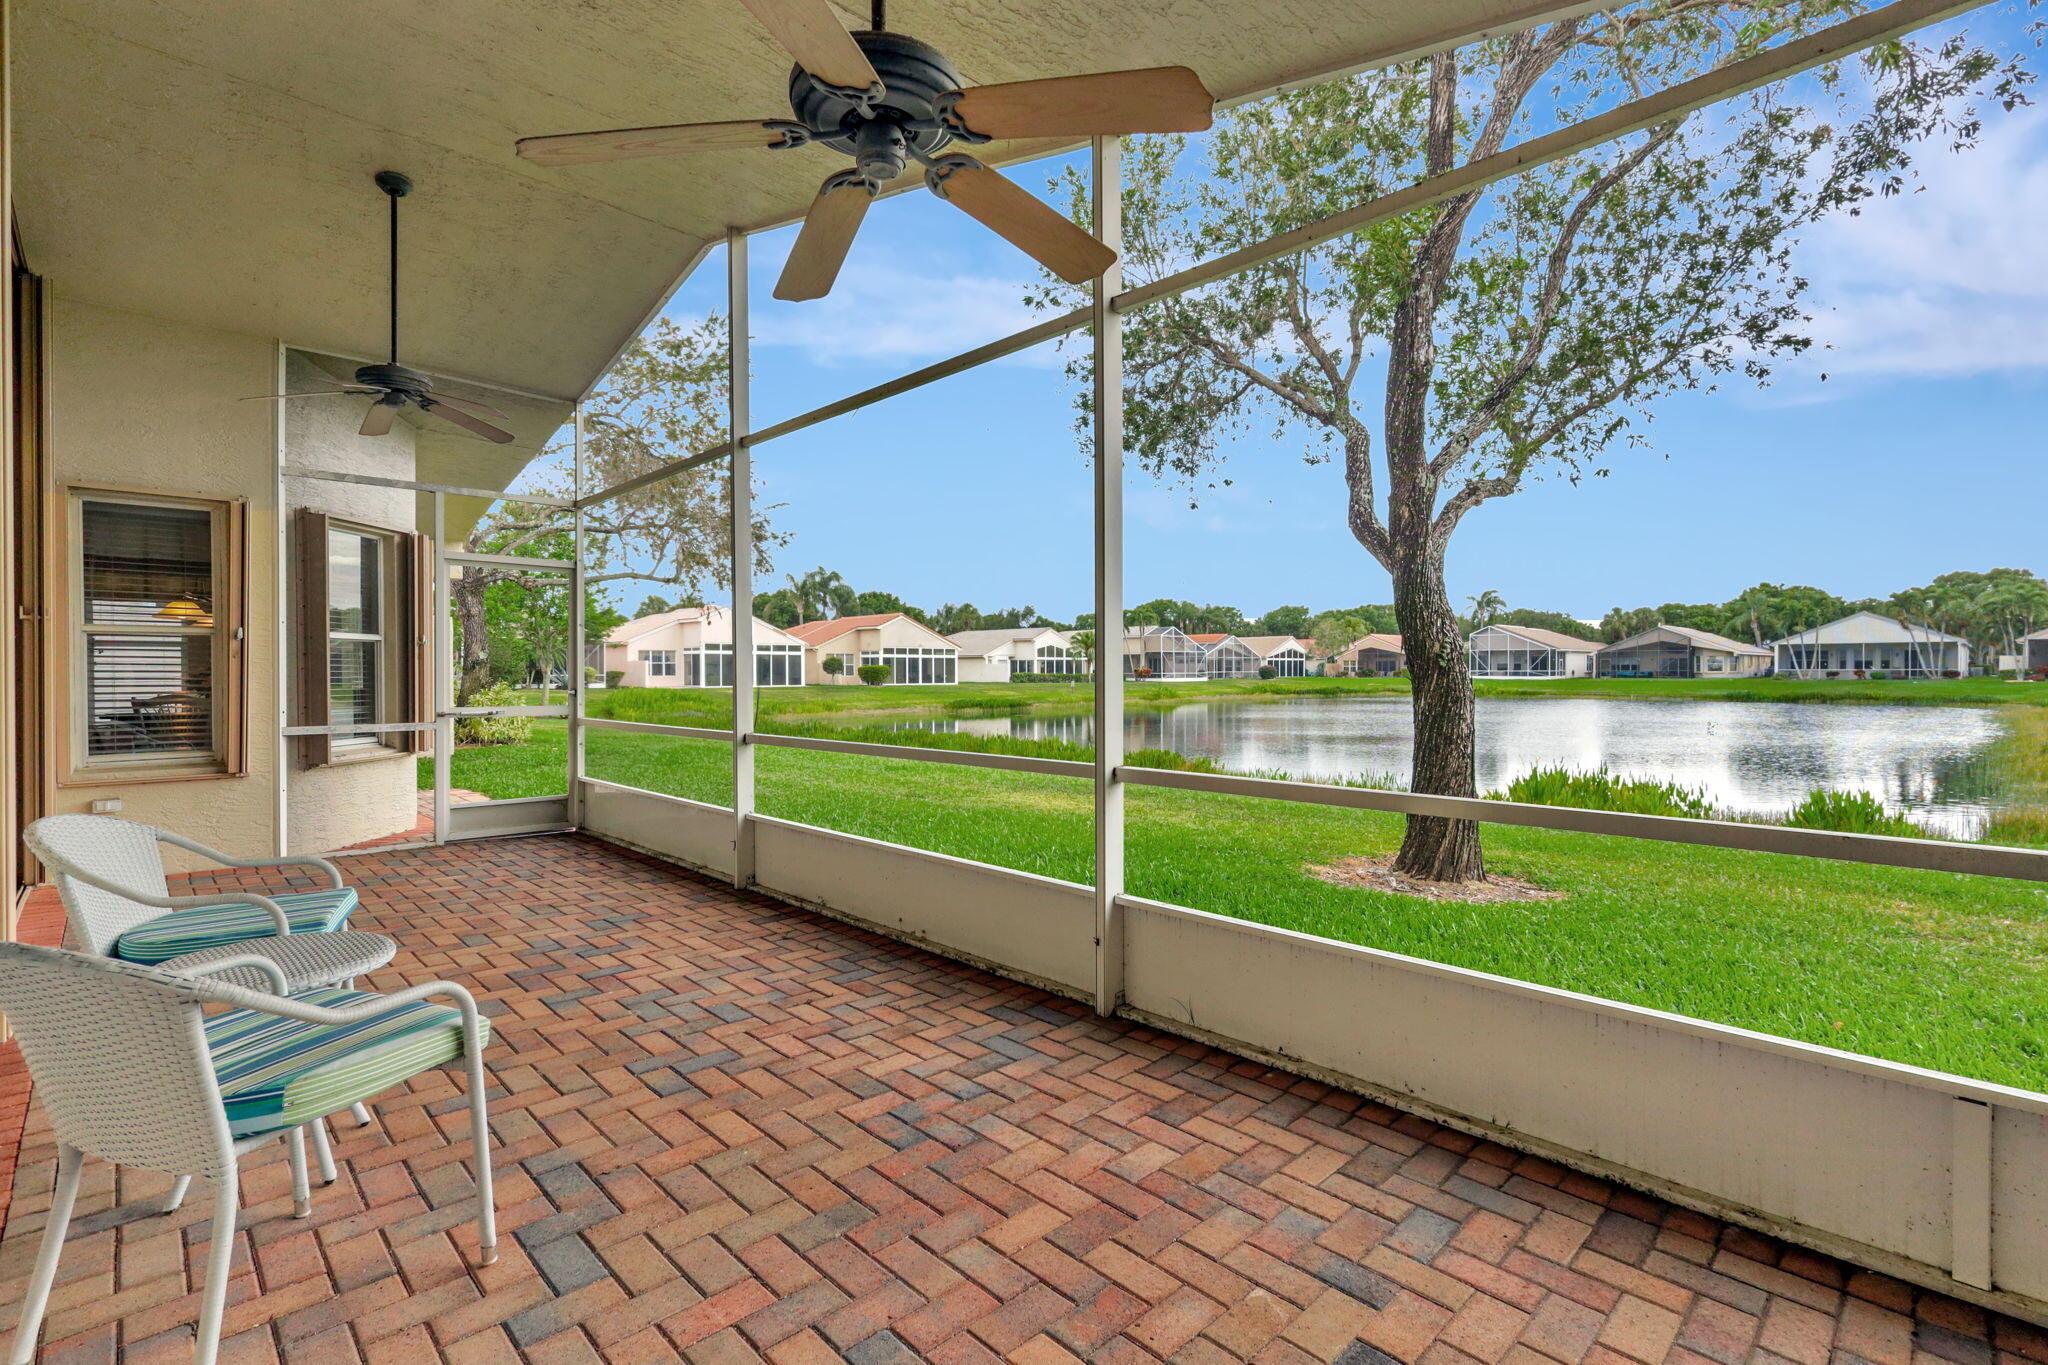 Don't miss this beautiful South Pacific model waterfront home in Valencia Lakes by GL Homes with the renovated clubhouse opening in December! Tile throughout the living area with wood laminate in the guest room & carpet in the primary bedroom. The bright kitchen includes new stainless steel appliances (2022) & a lovely breakfast area. The 3rd bedroom is being used as a den with a built in desk, shelves & storage. A lovely lanai overlooking the lake & accordion shutters throughout. Community amenities: cafe, resort & lap pool, pickleball, tennis, numerous clubs & leagues, fitness center, water aerobics, yoga, zumba, art, musical productions/shows, billiards, business center, card rooms & much more. Enjoy the 55+ lifestyle to the fullest!